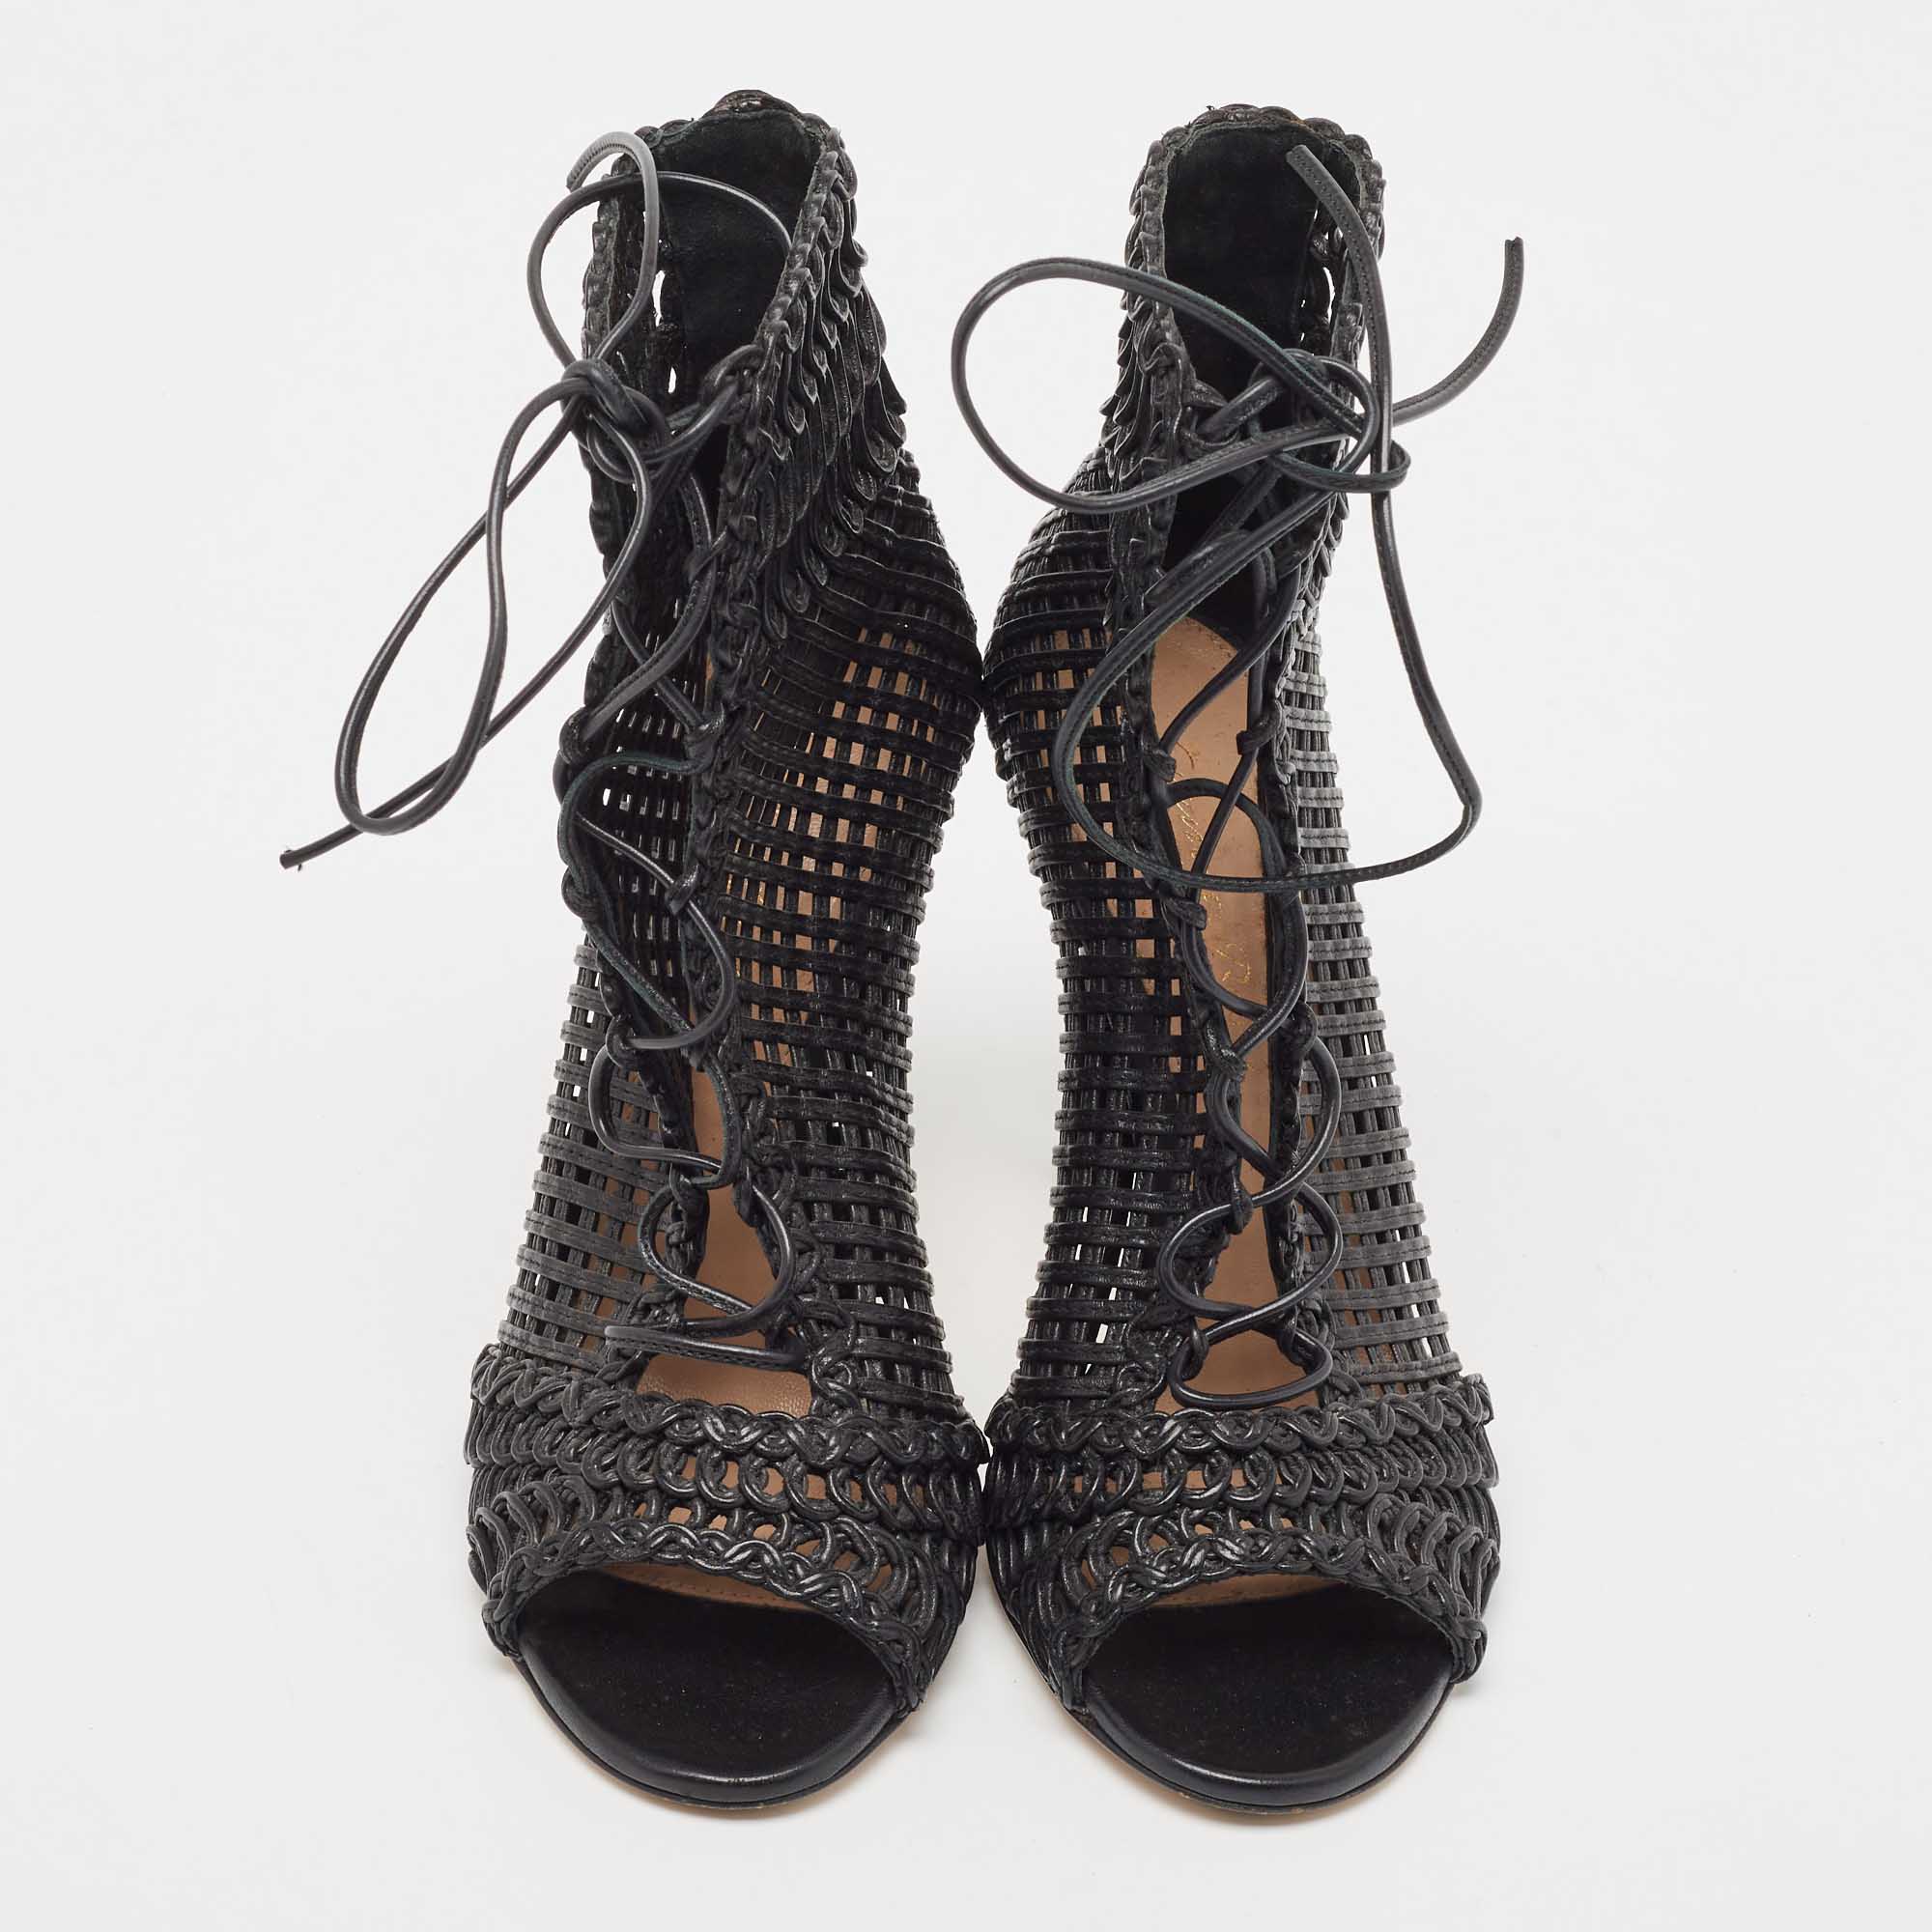 Gianvito Rossi Black Leather Woven Lace Up Sandals Size 35